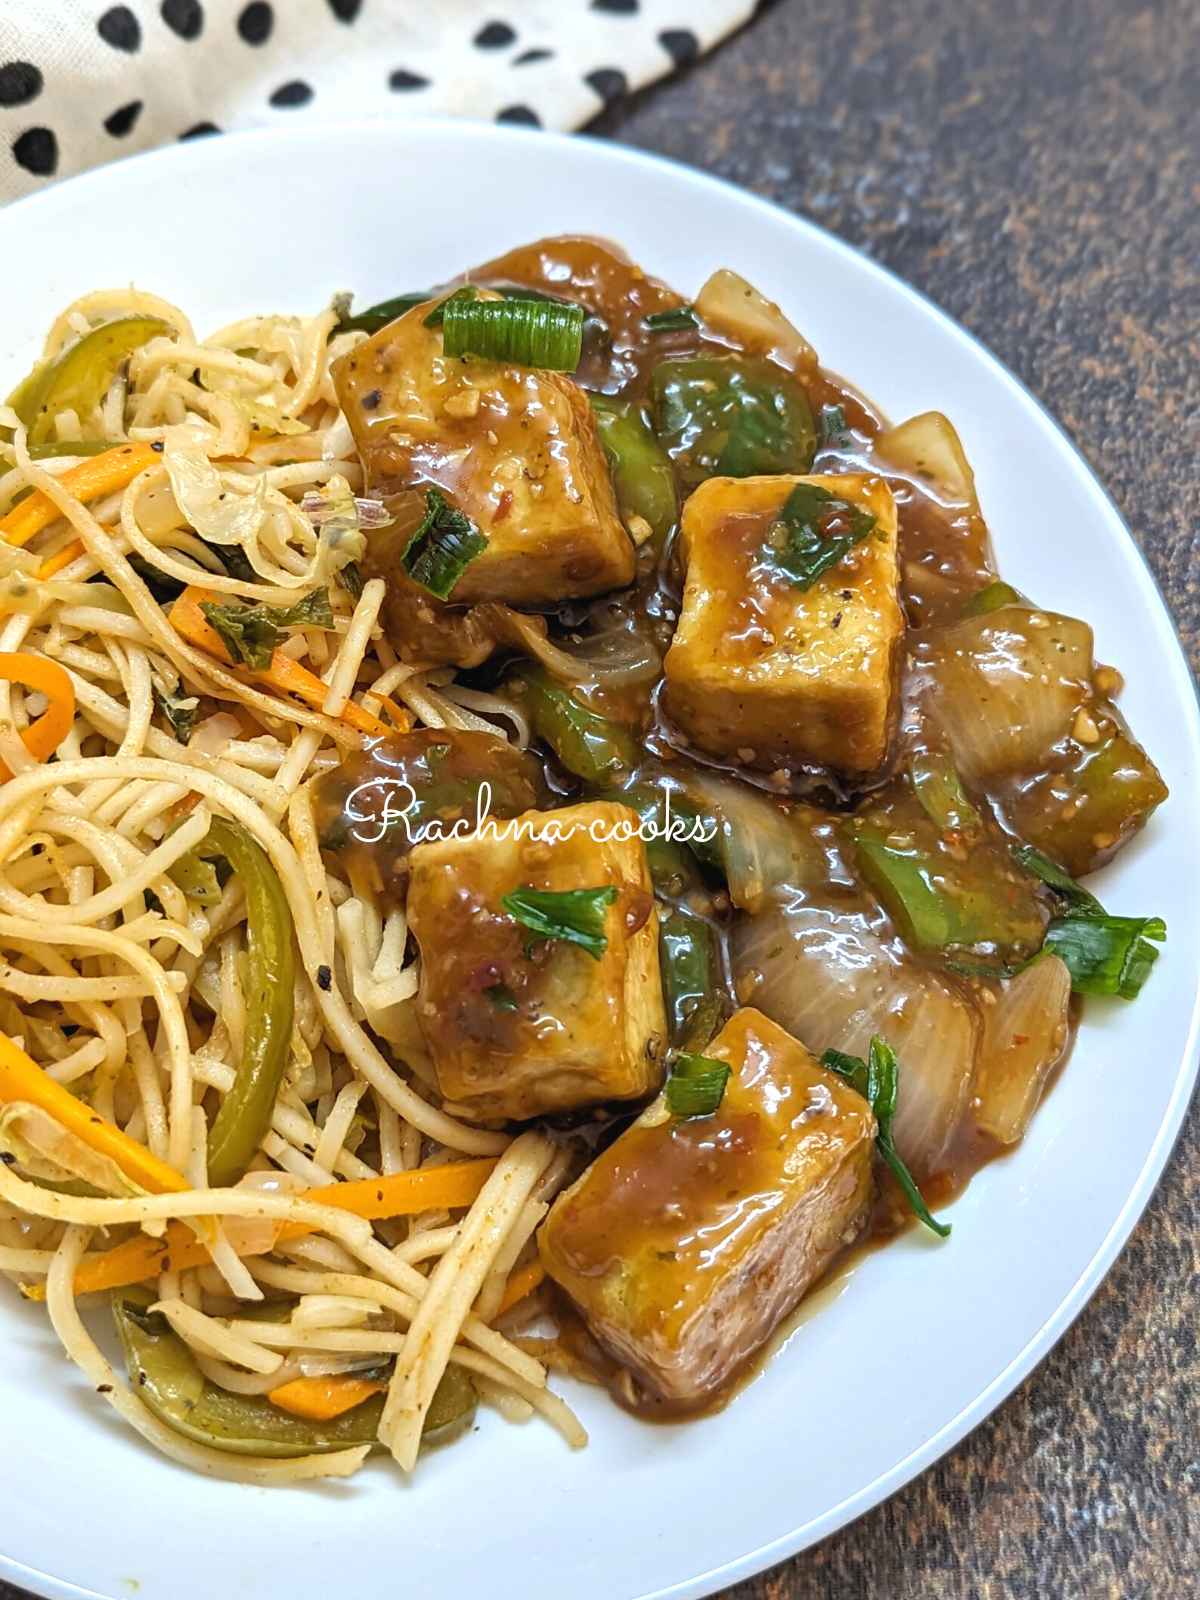 Tofu manchurian served with noodles.